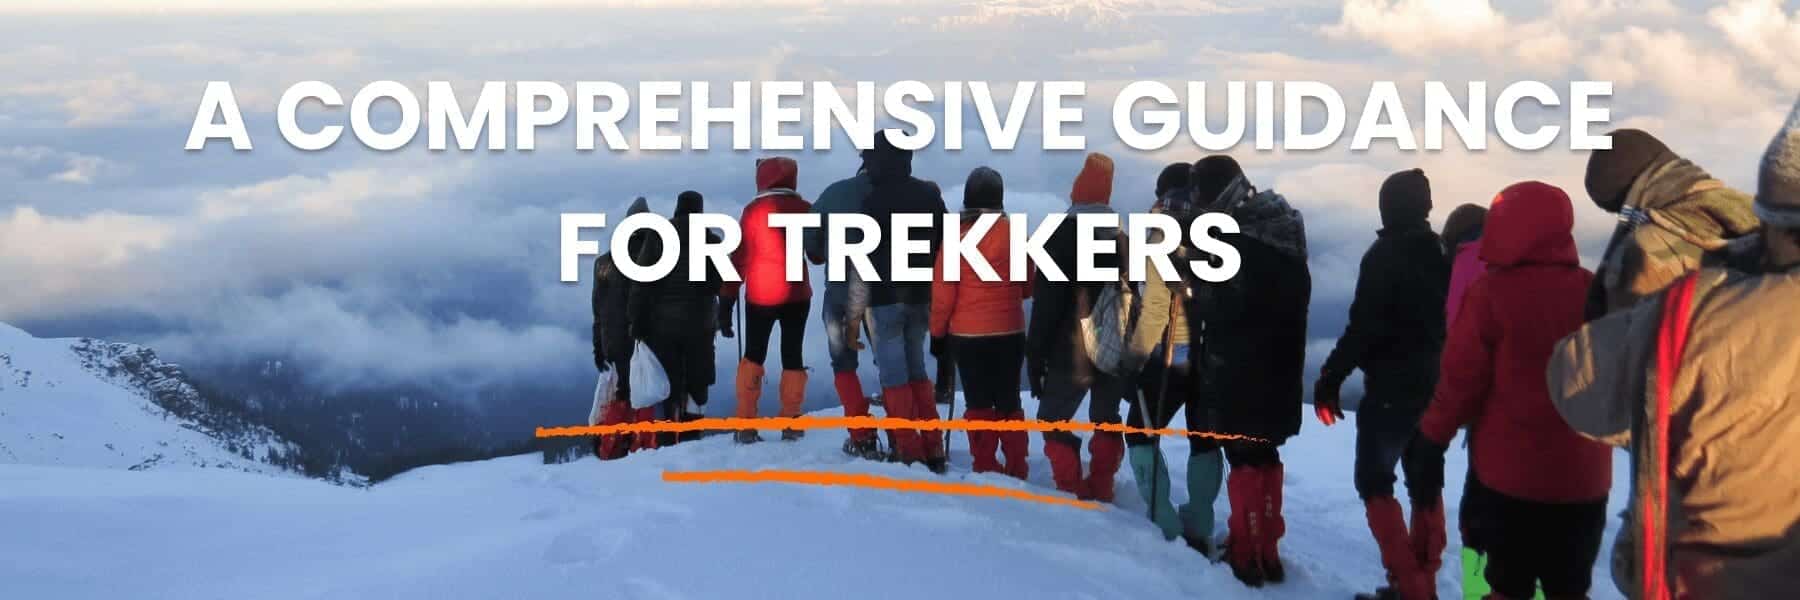 A comprehensive guidance for trekkers